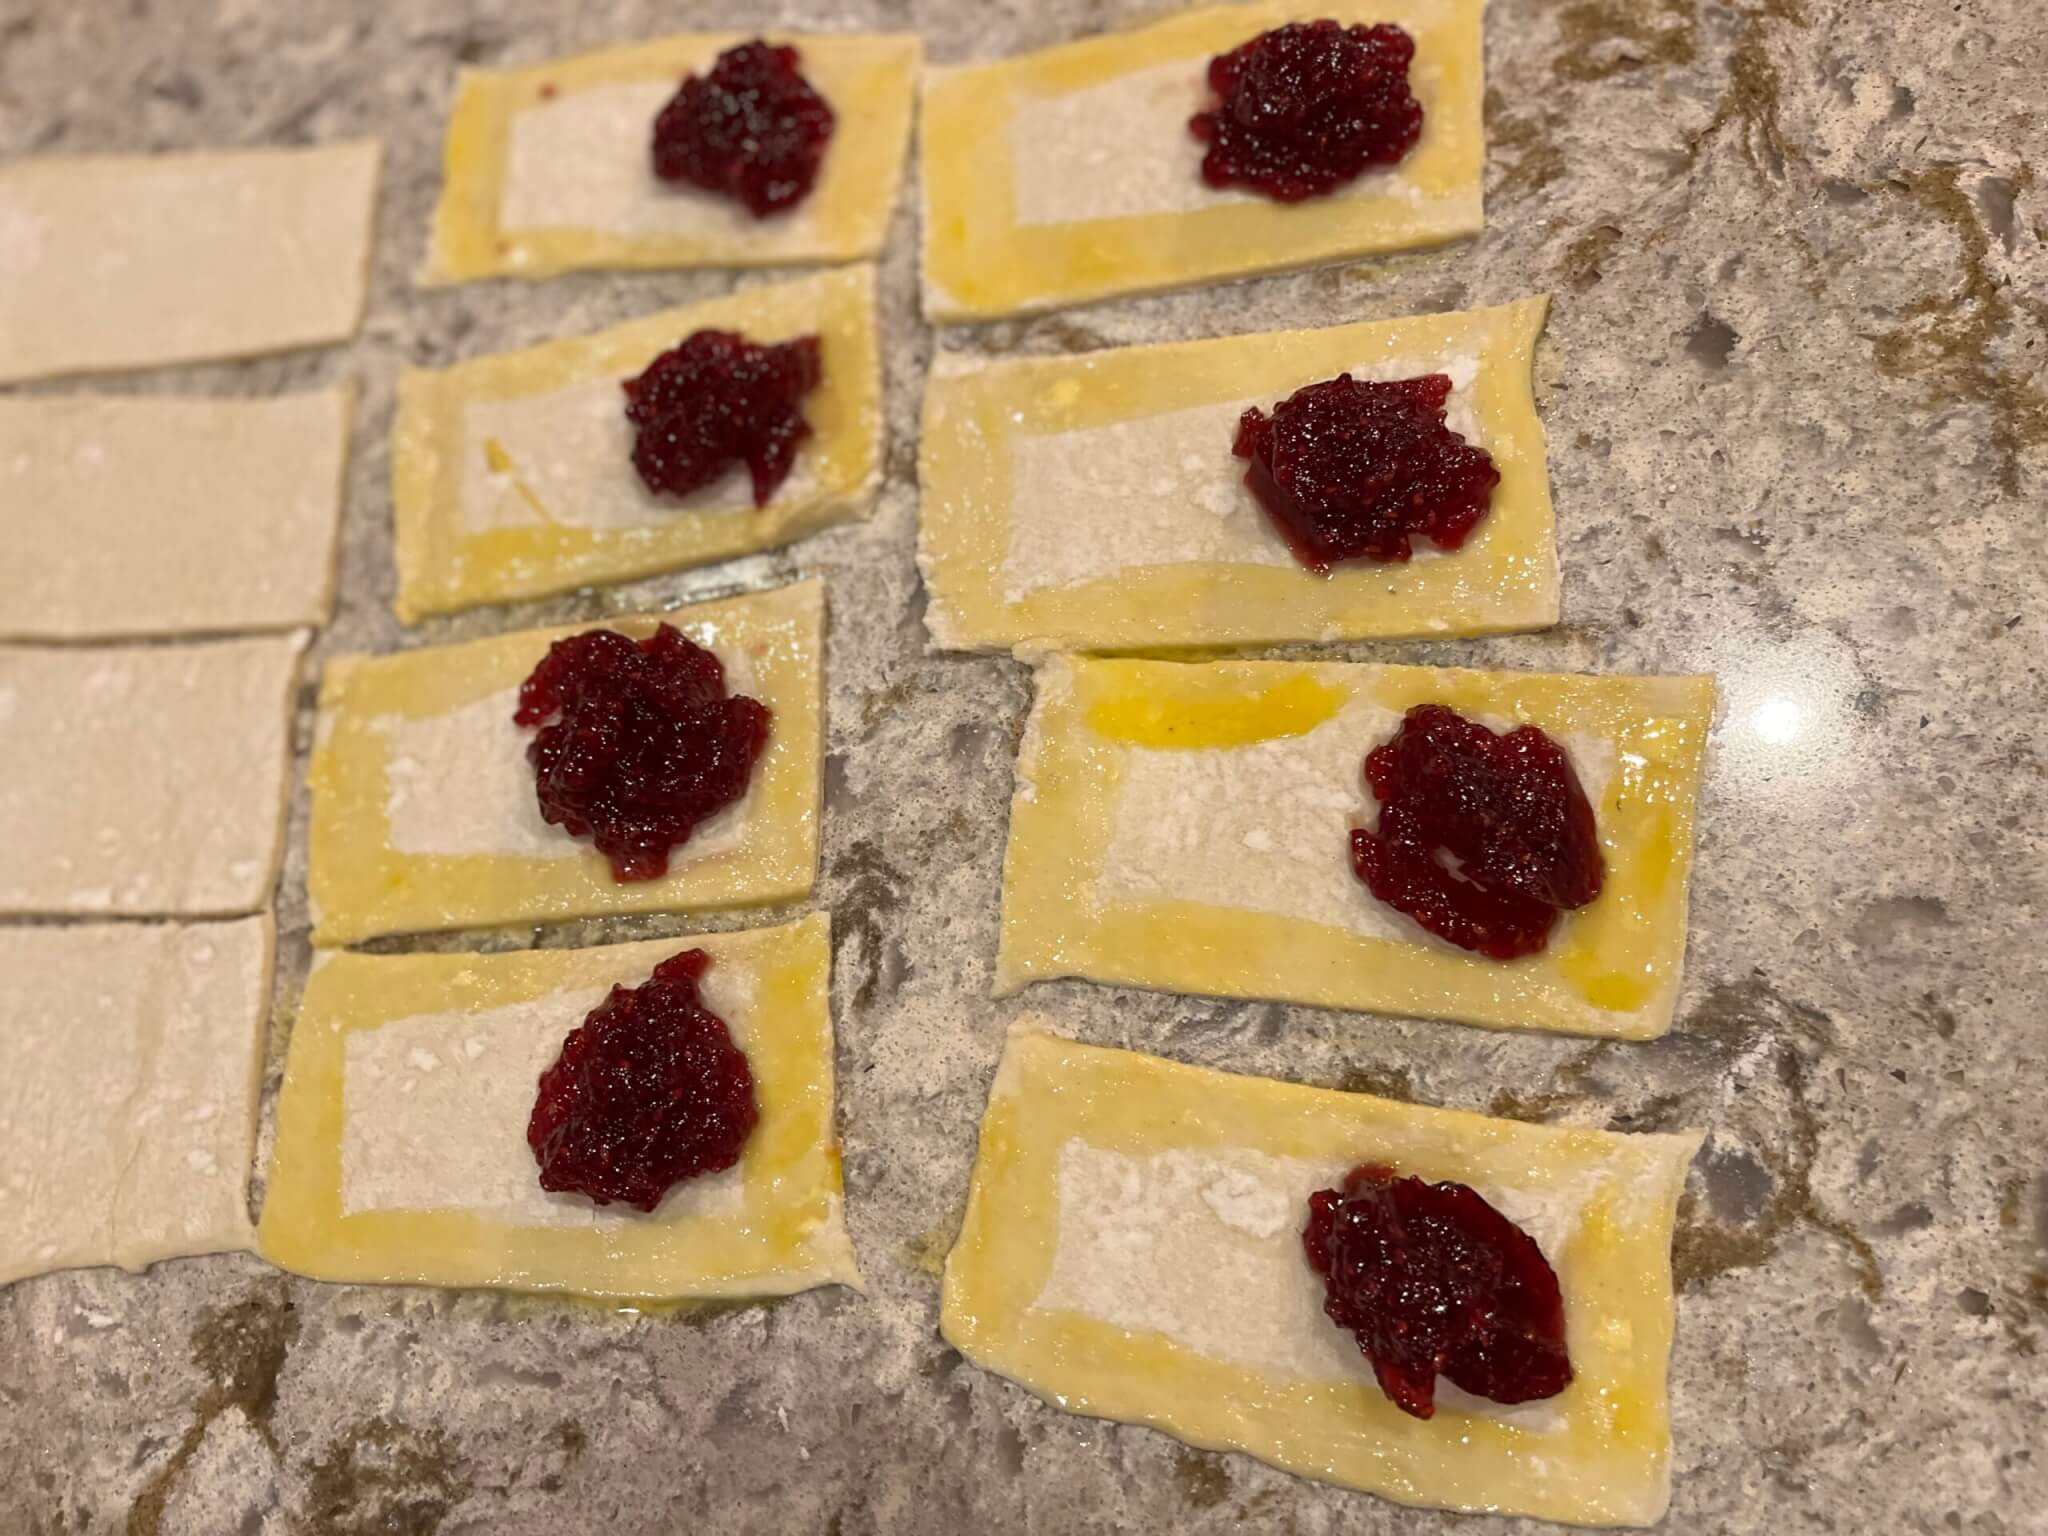 Teaspoons of New Canaan Farms Raspberry Jam  placed on rectangles of puff pastry, with beaten egg around the sides